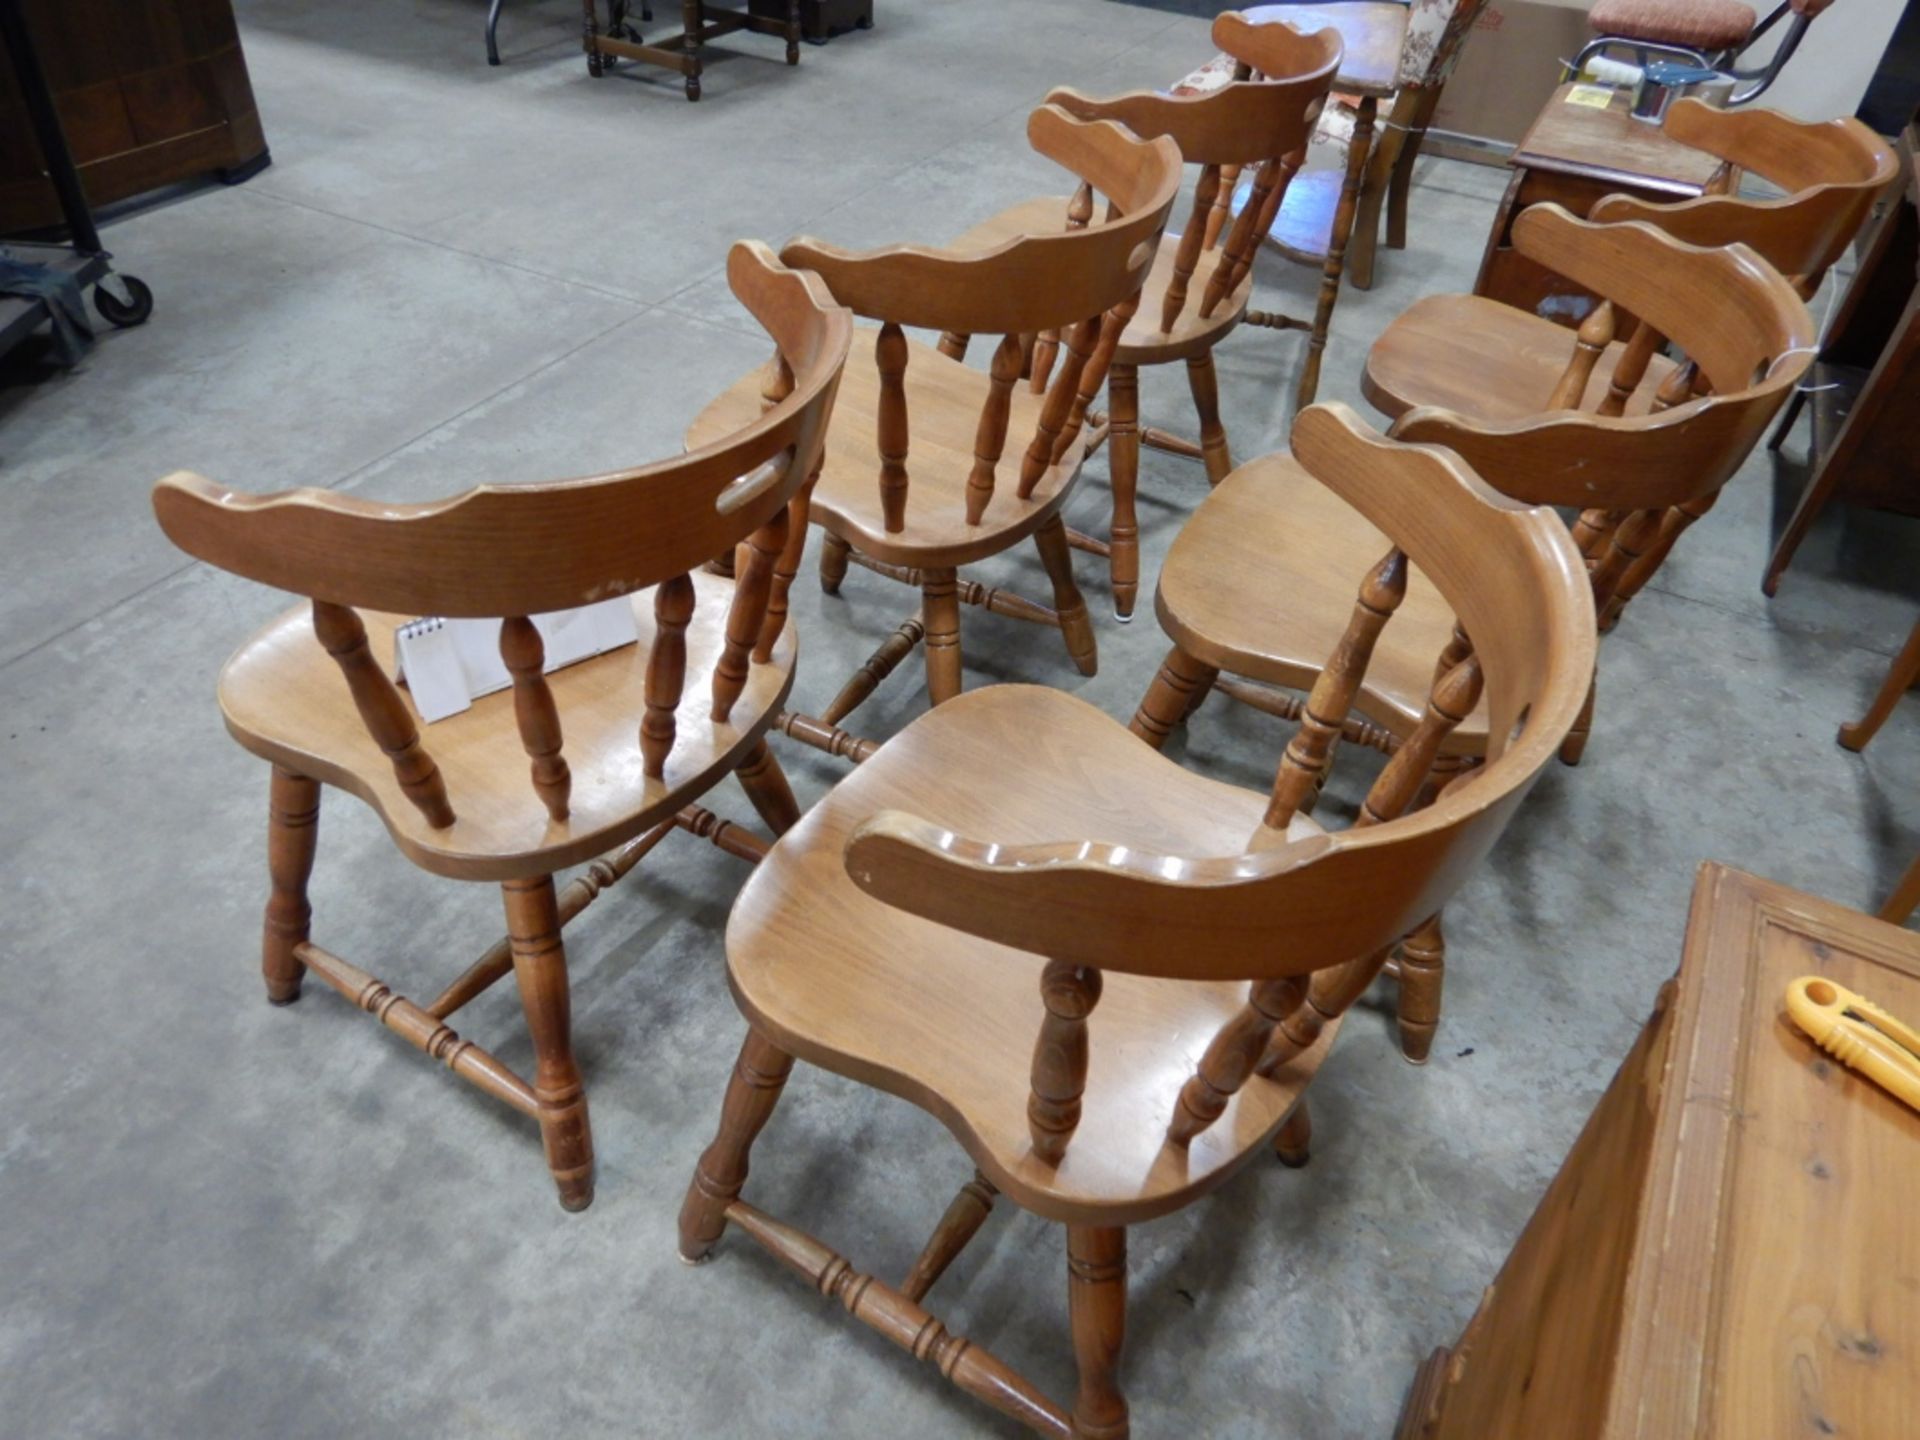 SET OF 6-WOOD CAPTIONS CHAIRS - Image 2 of 2